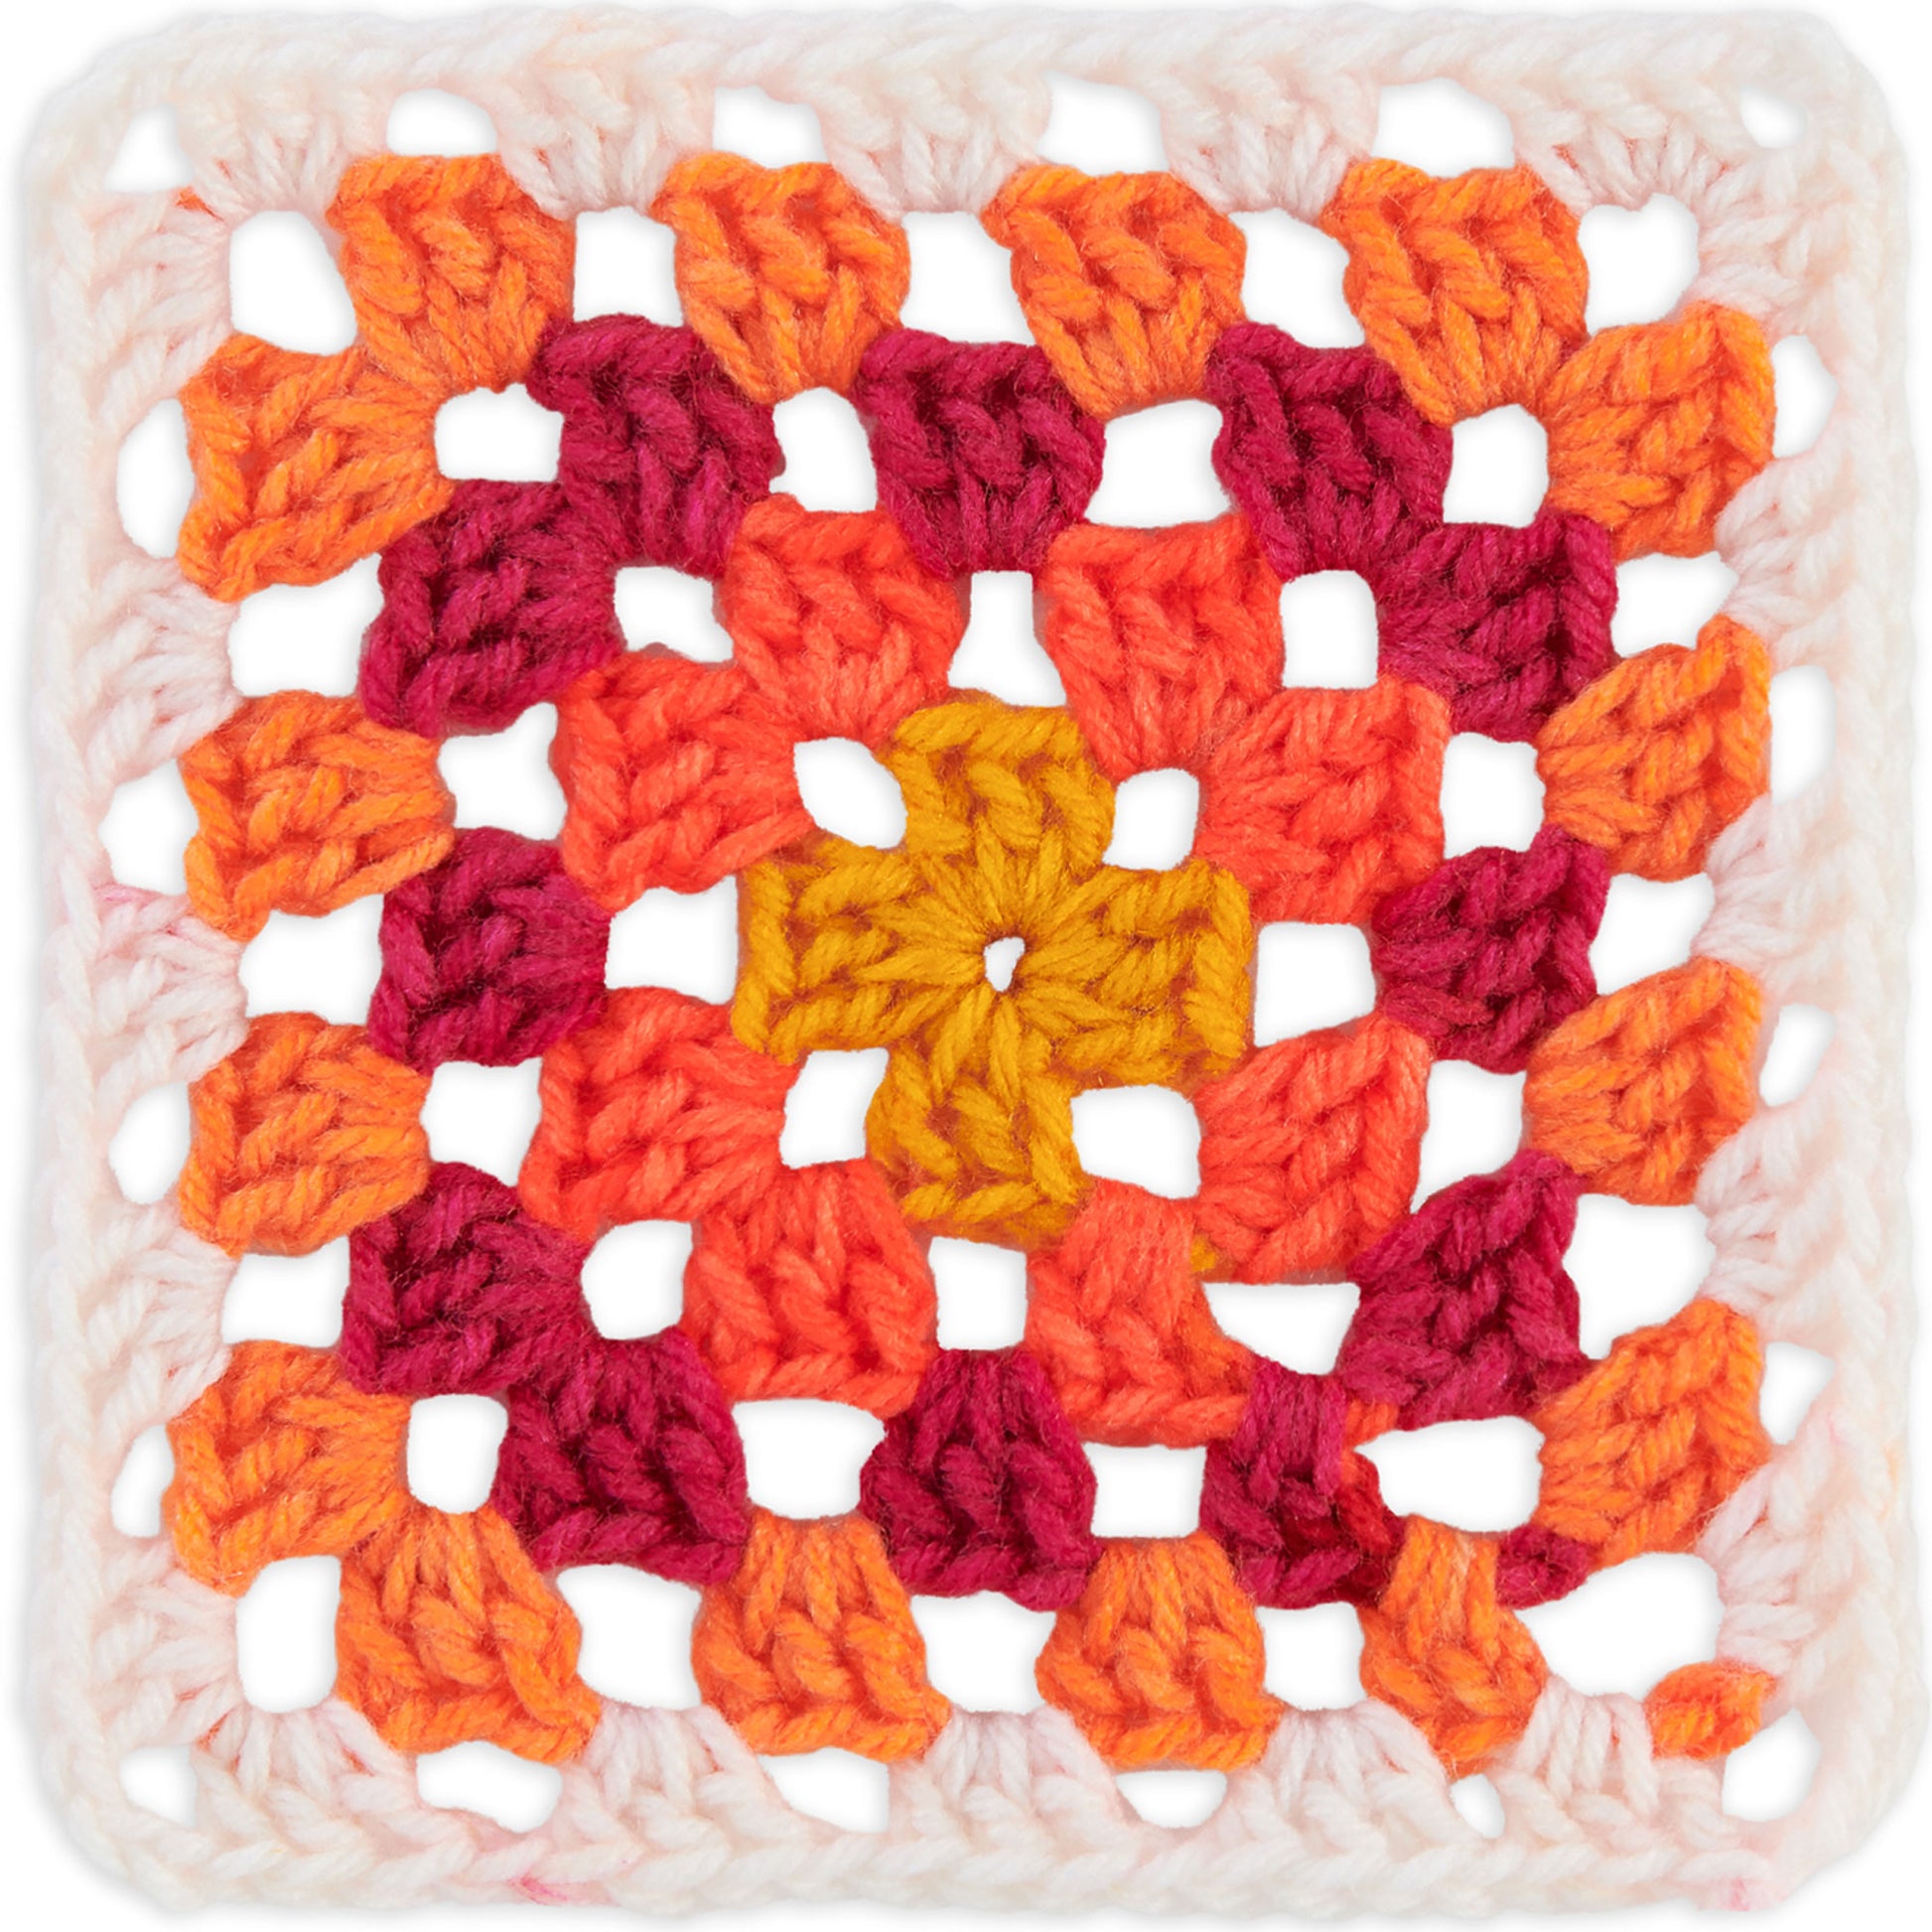 Red Heart All In One Granny Square Yarn (250g/8.8oz) Soft  White - Citrus Twist